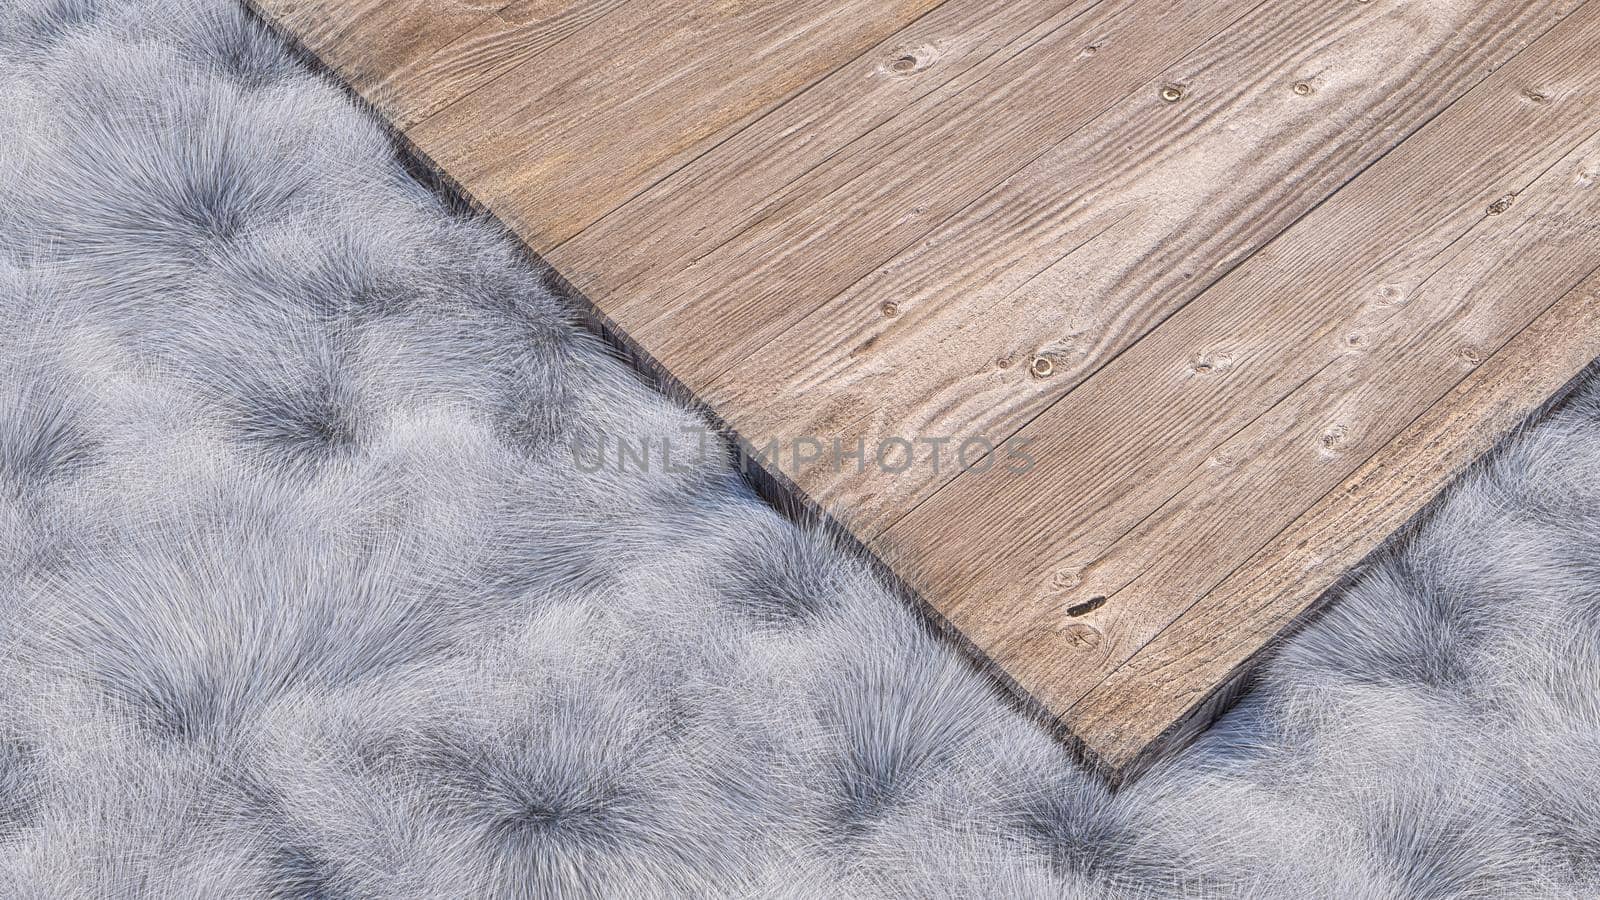 A 3d rendering image of wooden plate place on white fur.